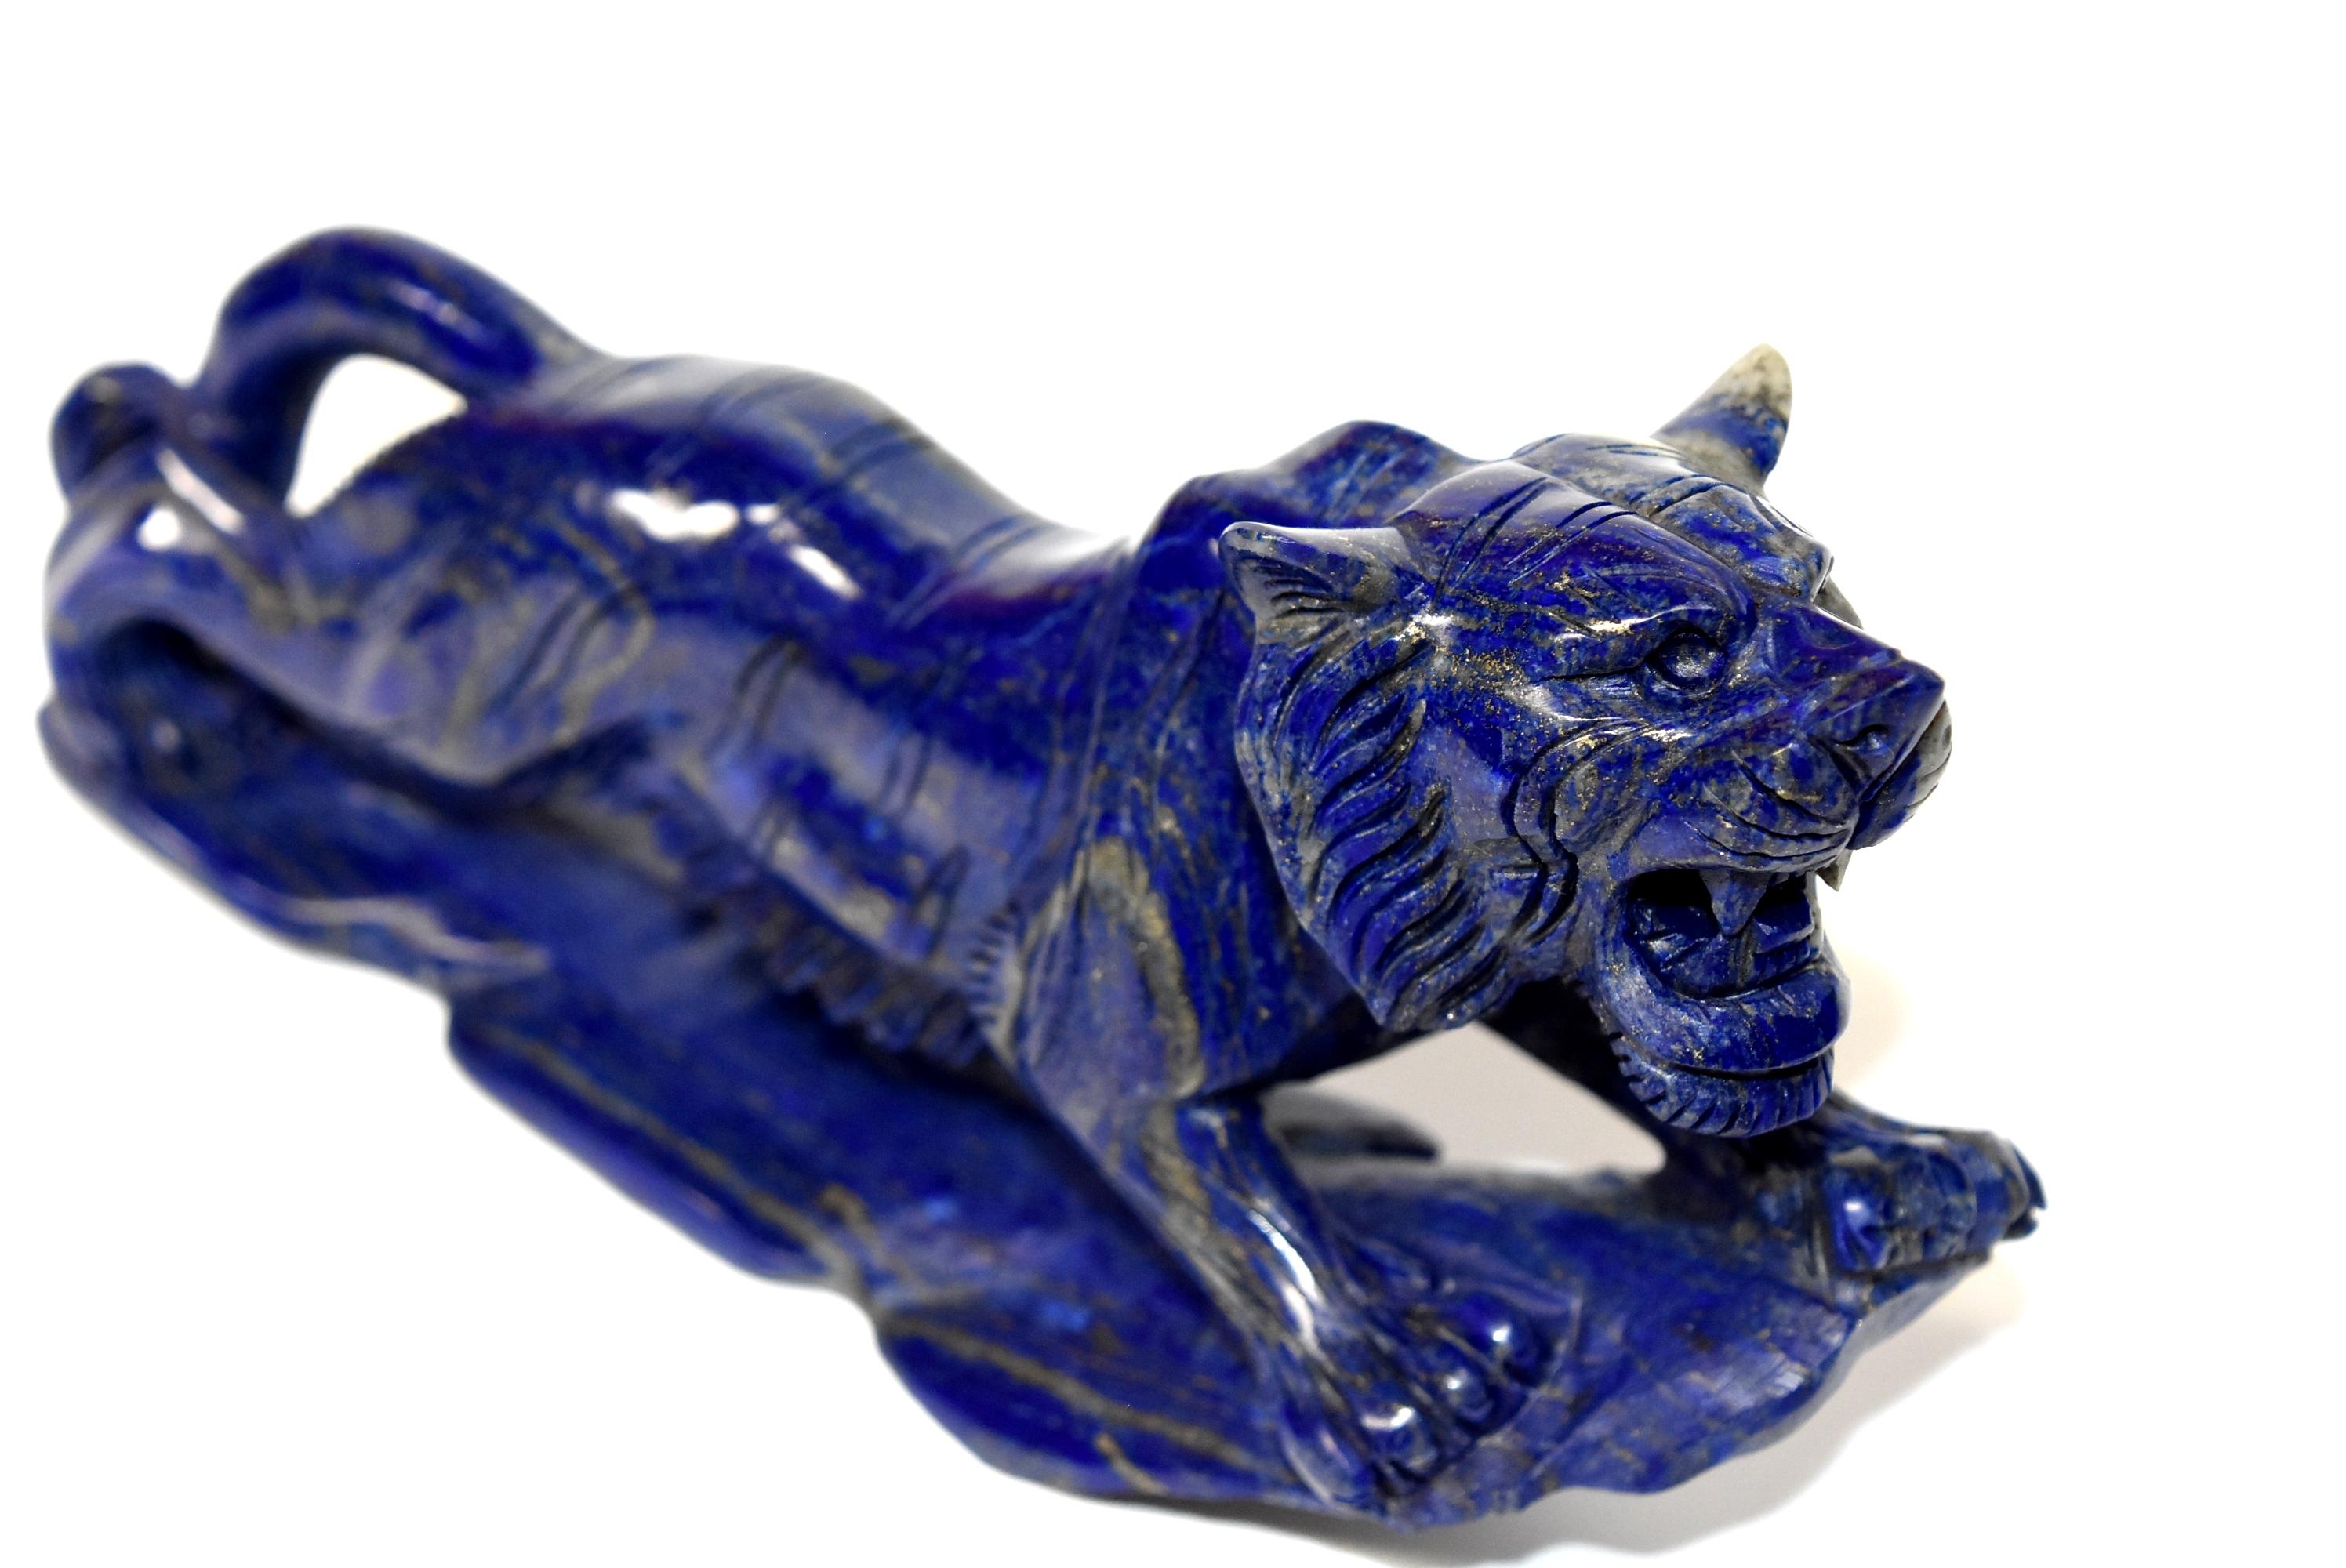 Lapis Lazuli Tiger Sculpture Statue, 2 lb Natural with White Tooth 6